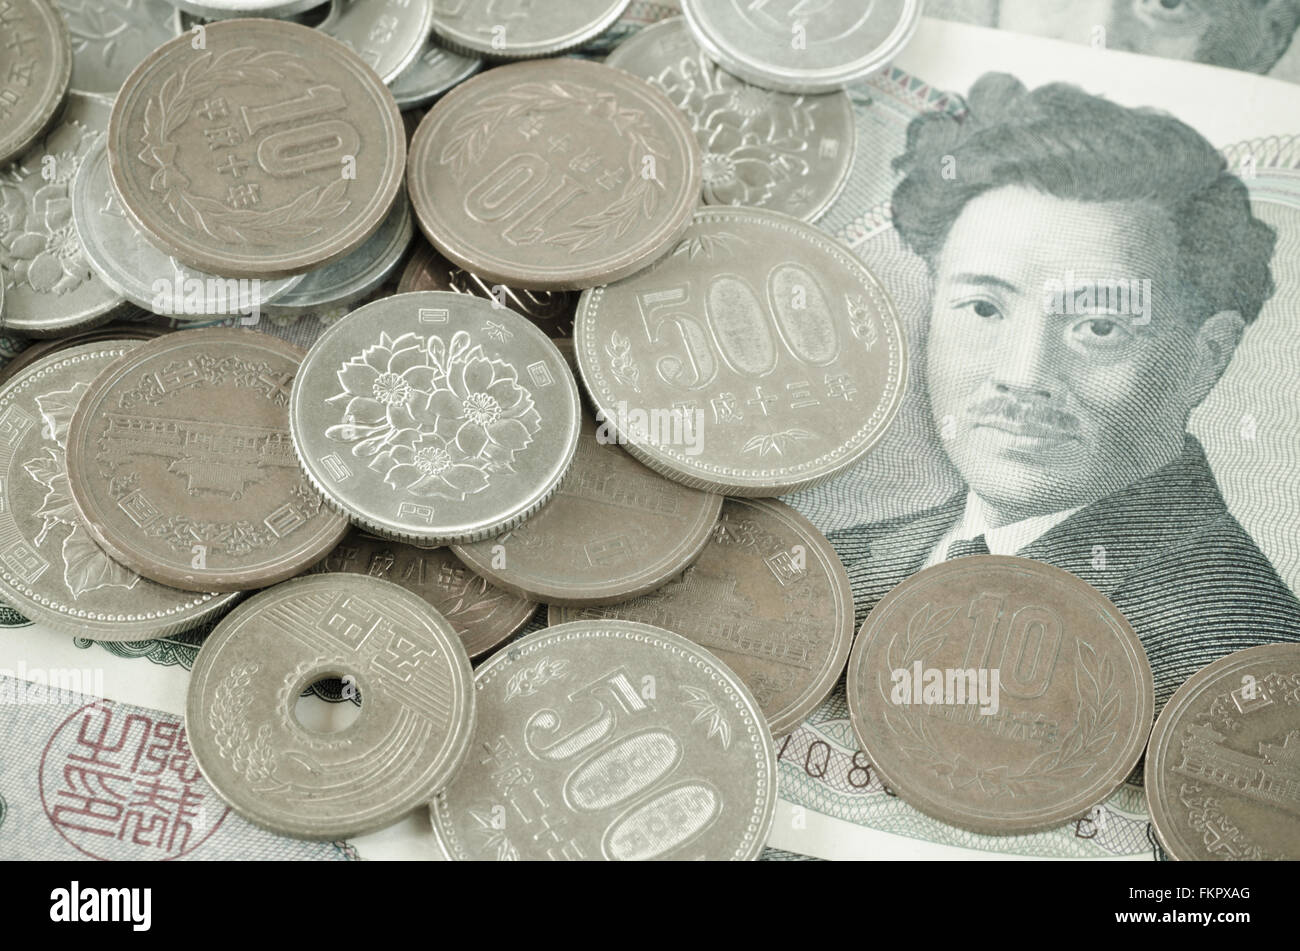 Japanese yen notes. Currency of Japan Stock Photo